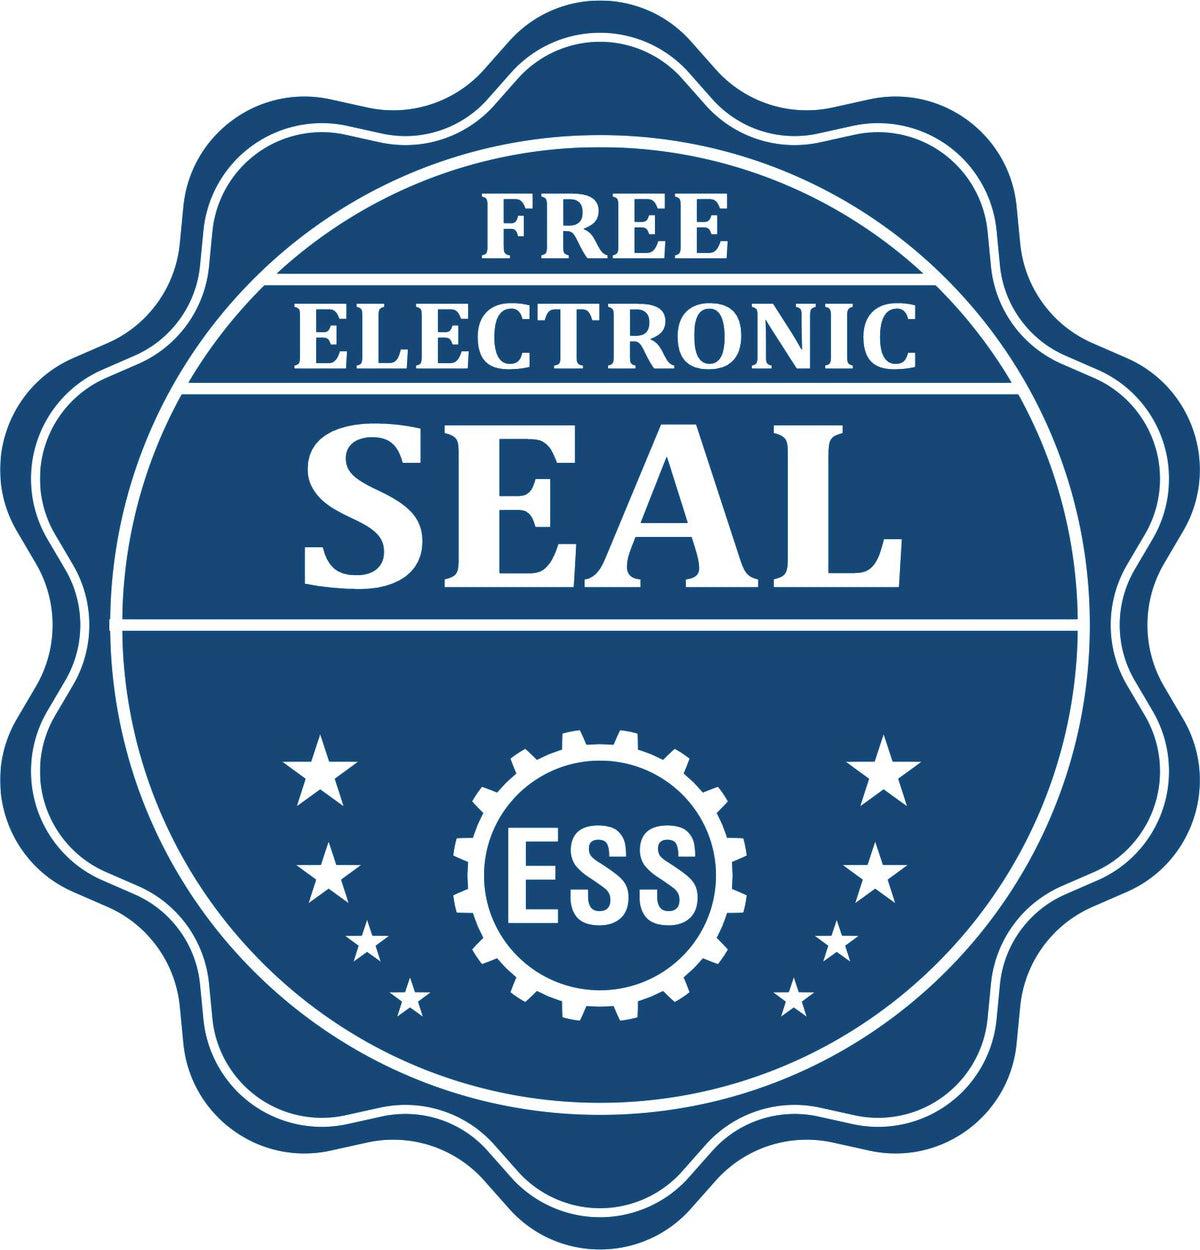 A badge showing a free electronic seal for the Gift Pennsylvania Land Surveyor Seal with stars and the ESS gear on the emblem.